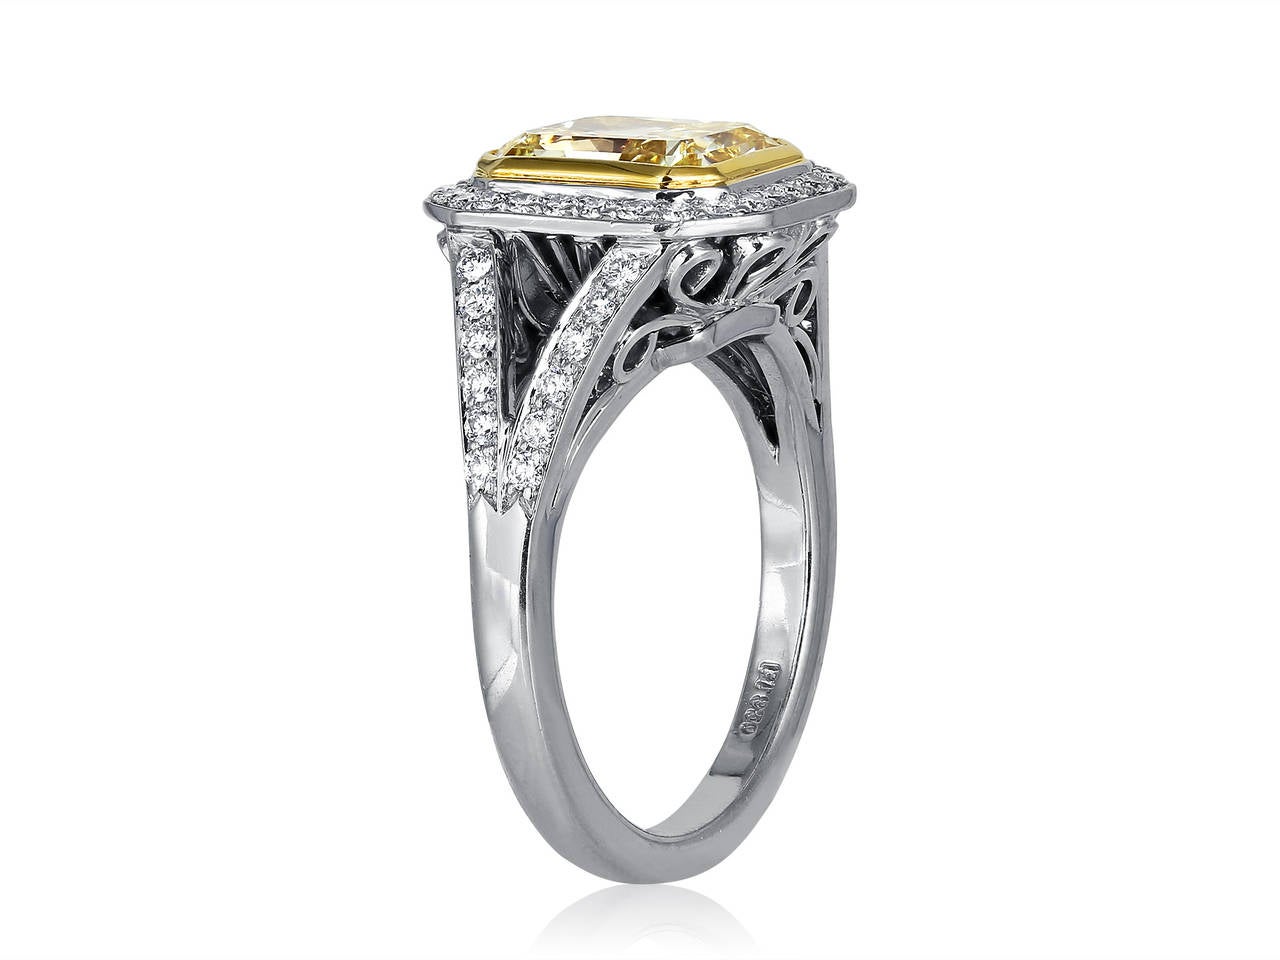 Platinum and 18 karat yellow gold custom made halo ring consisting of 1 bezel set rectangular radiant cut natural canary diamond weighing 2.88 carats, having a color and clarity of fancy yellow/SI1 respectively, measuring 8.77 x 7.06 x 4.81mm, with